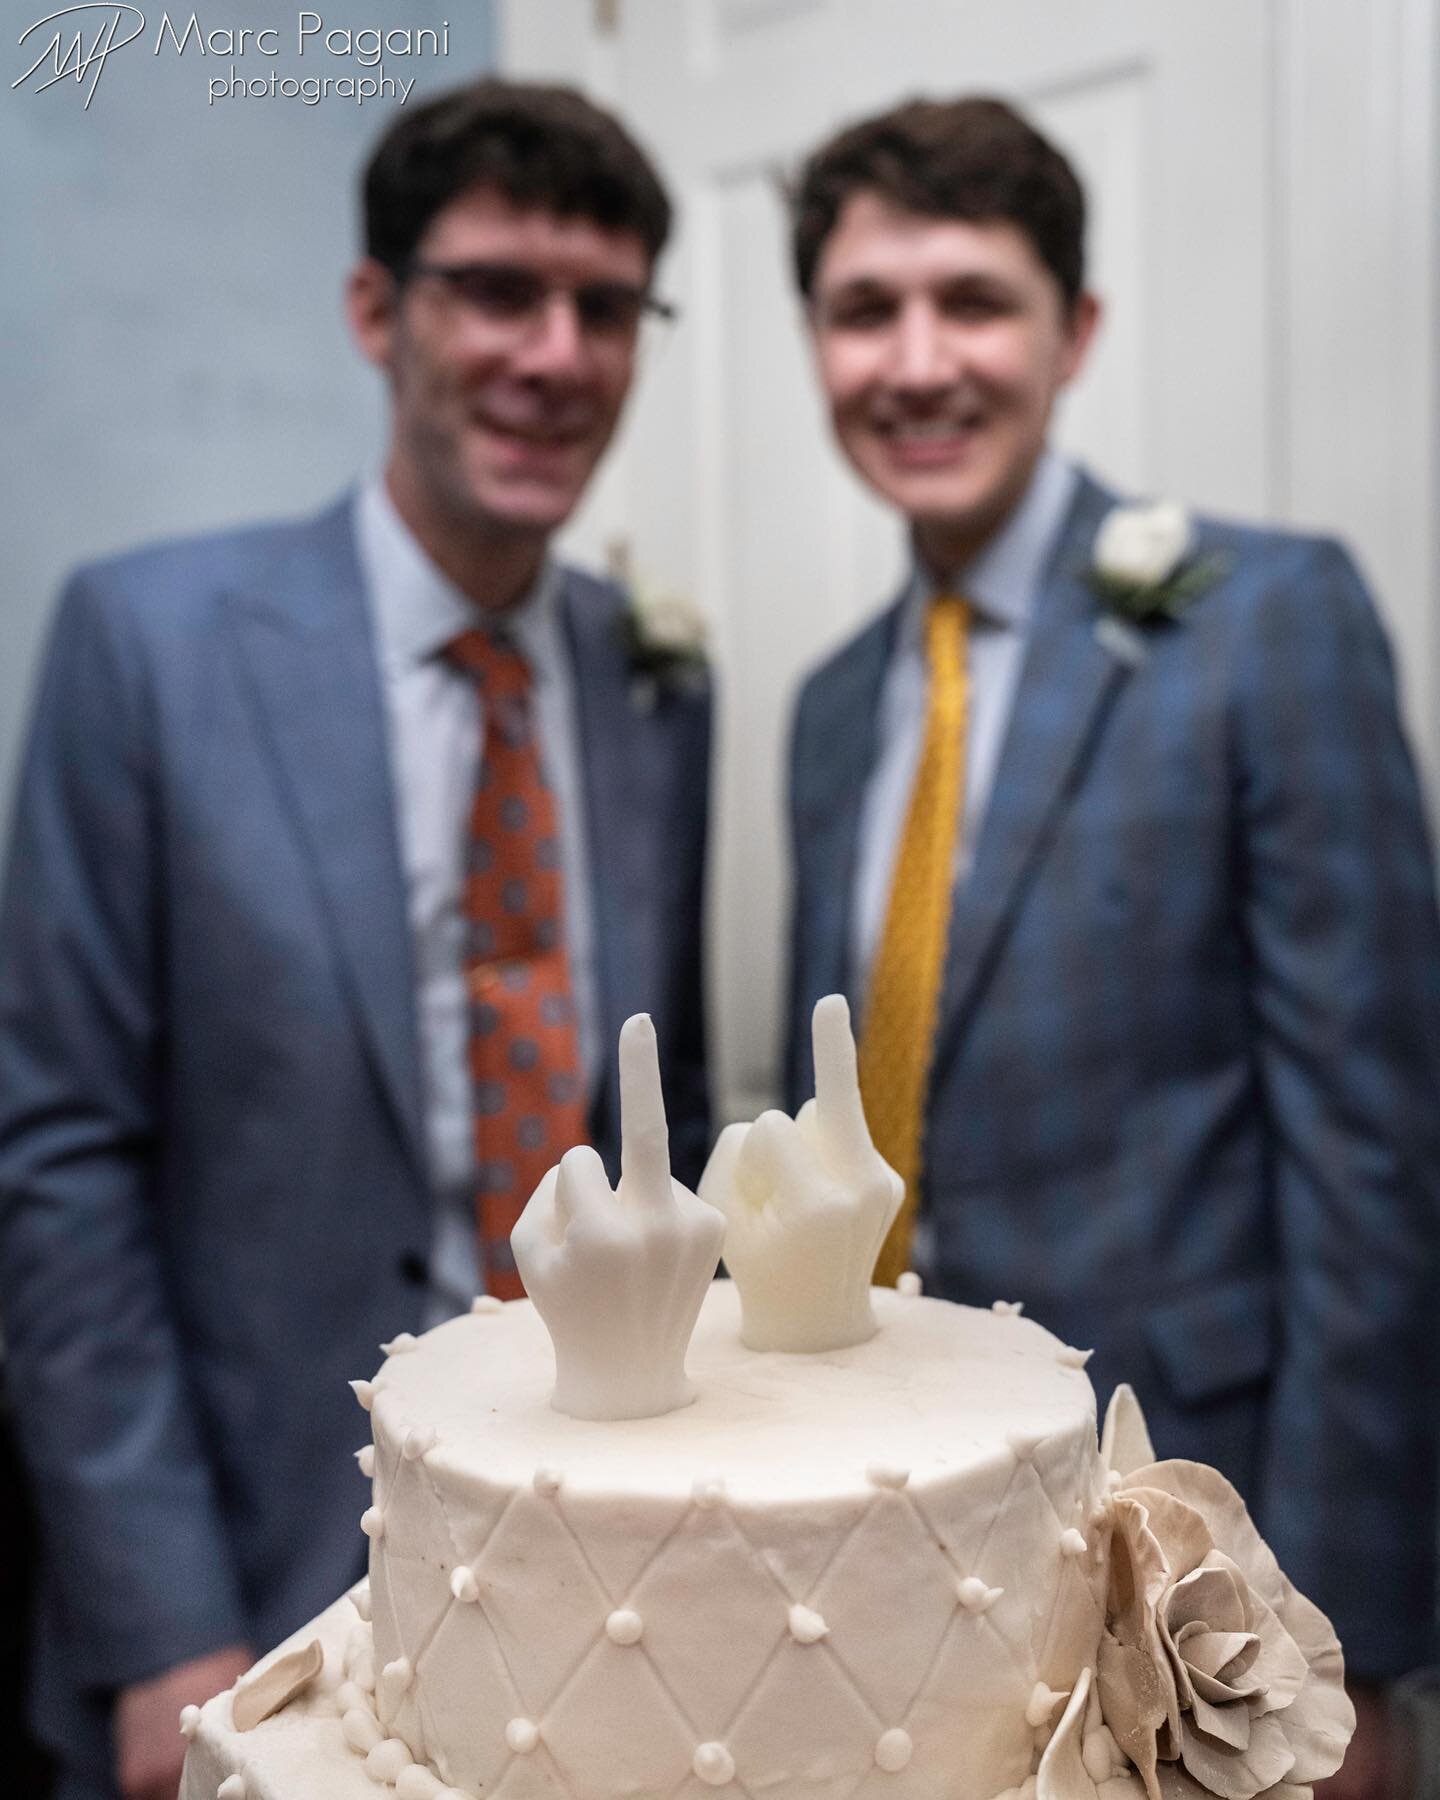 Best cake topper EVER at Wil and Keith&rsquo;s New Orleans wedding this past Saturday. Had a blast shooting their big event. #caketopper #weddingcake #flippingthebird #givingthefinger #theknot #weddingwire #stylemepretty #neworleanswedding #samesexwe